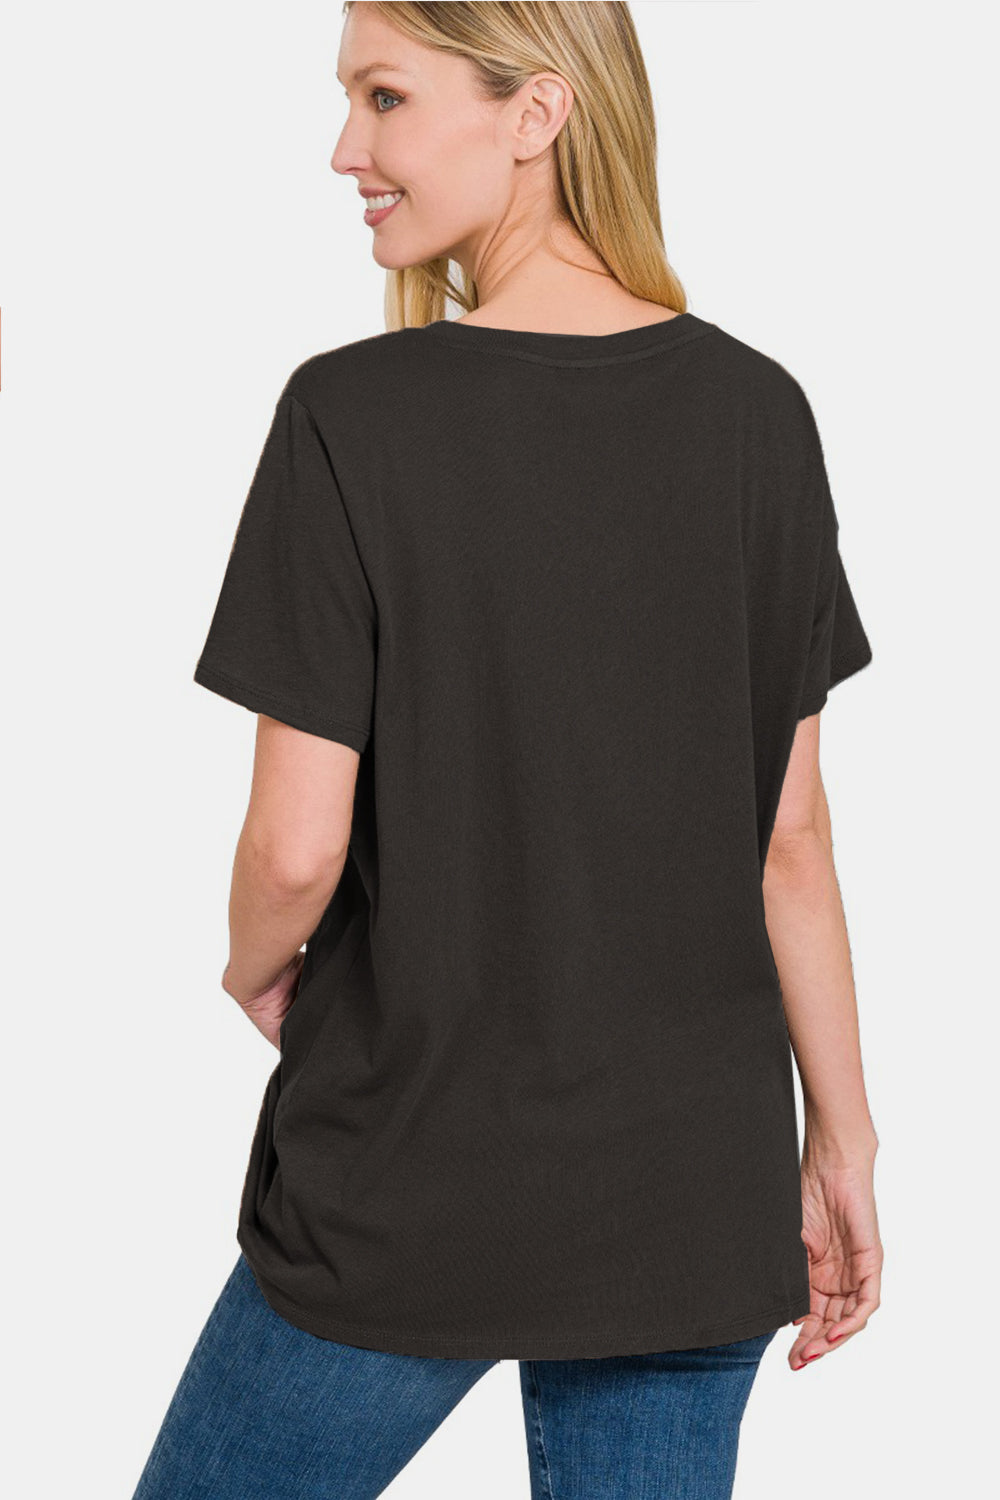 Zenana Full Size V-Neck Short Sleeve T-Shirt-100 Short Sleeve Tops-Inspired by Justeen-Women's Clothing Boutique in Chicago, Illinois